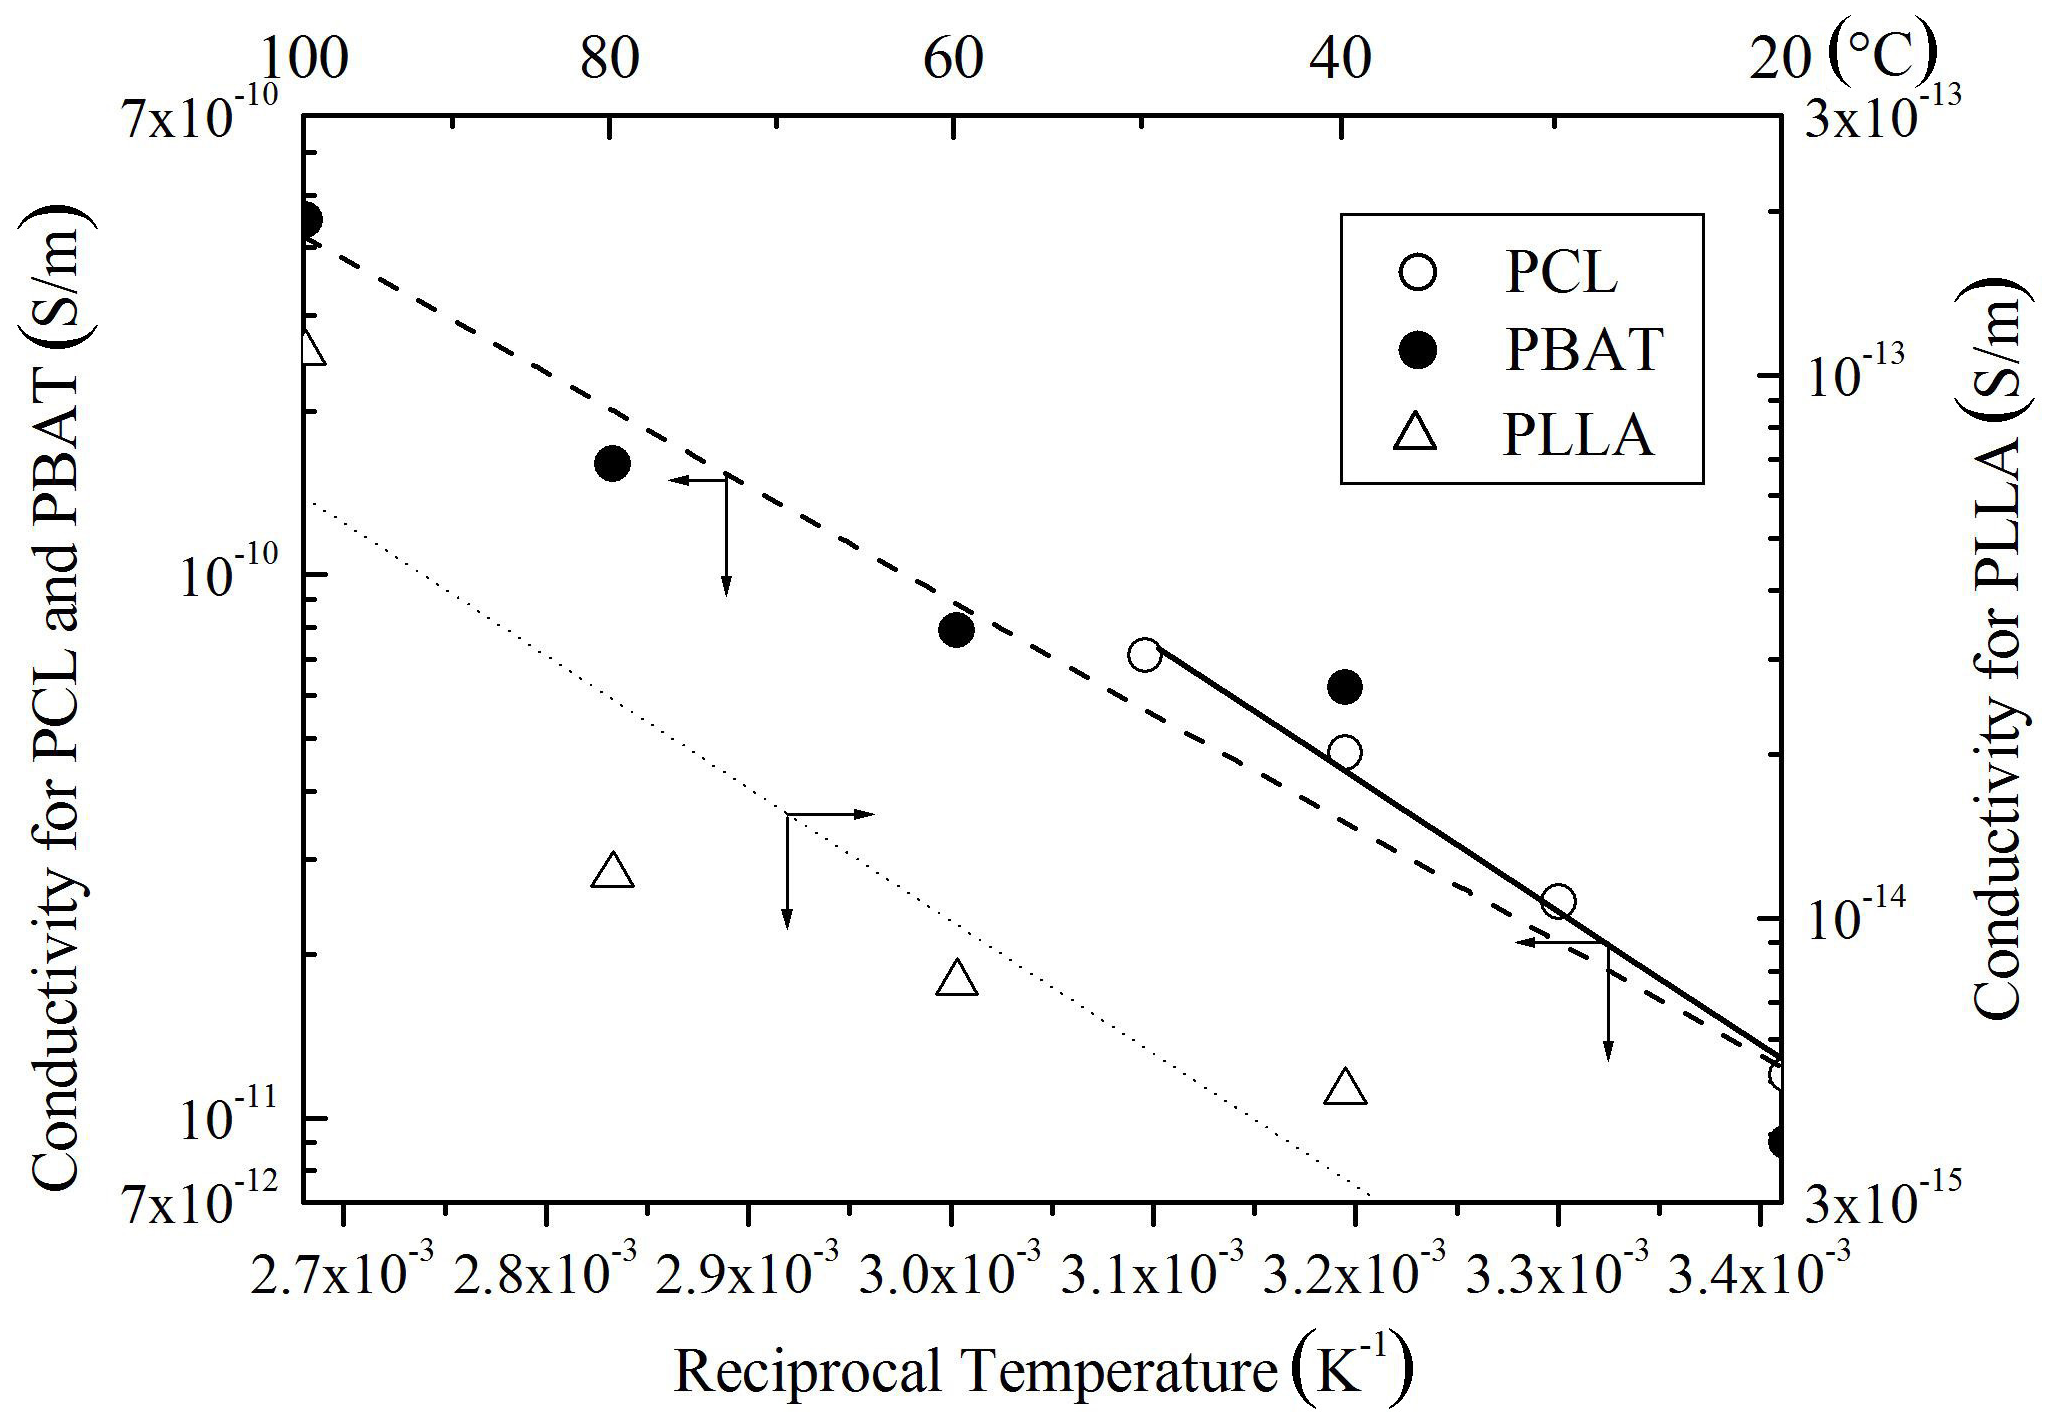 Reciprocal temperature dependence of dc conductivity measuredfor polybutylene succinate (PBS) polybutylene succinateadipate (PBSA) polycaprolactone (PCL) polybutylene adipate terephthalate(PBAT) and poly-L-lactic acid (PLLA). (a) PBS and PBSA (b)PCL PBAT and PLLA.